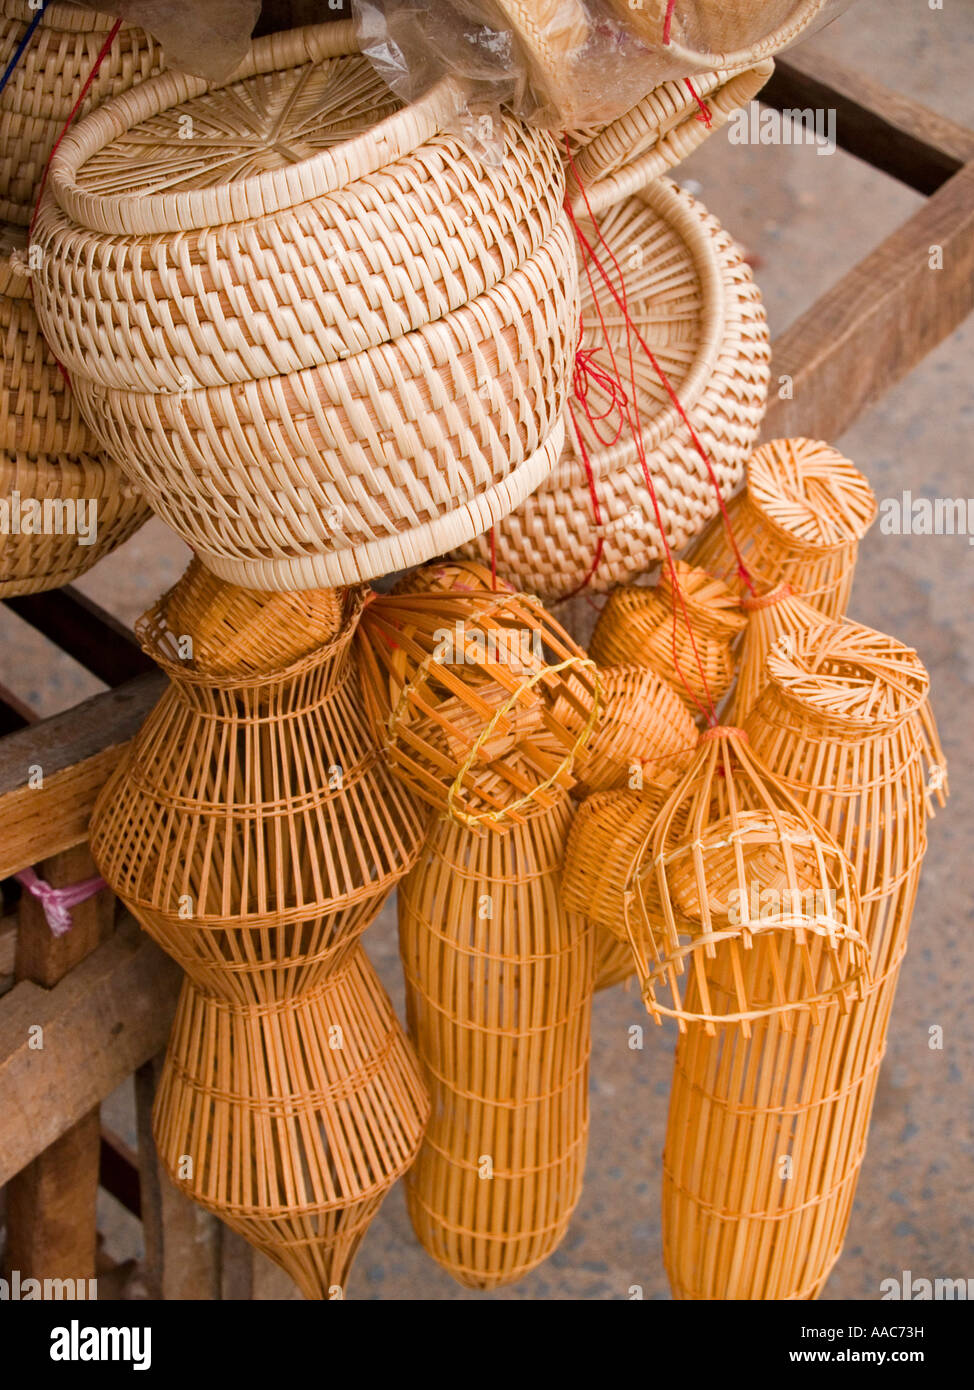 https://c8.alamy.com/comp/AAC73H/bamboo-fishing-baskets-and-sticky-rice-baskets-made-by-artisans-for-AAC73H.jpg